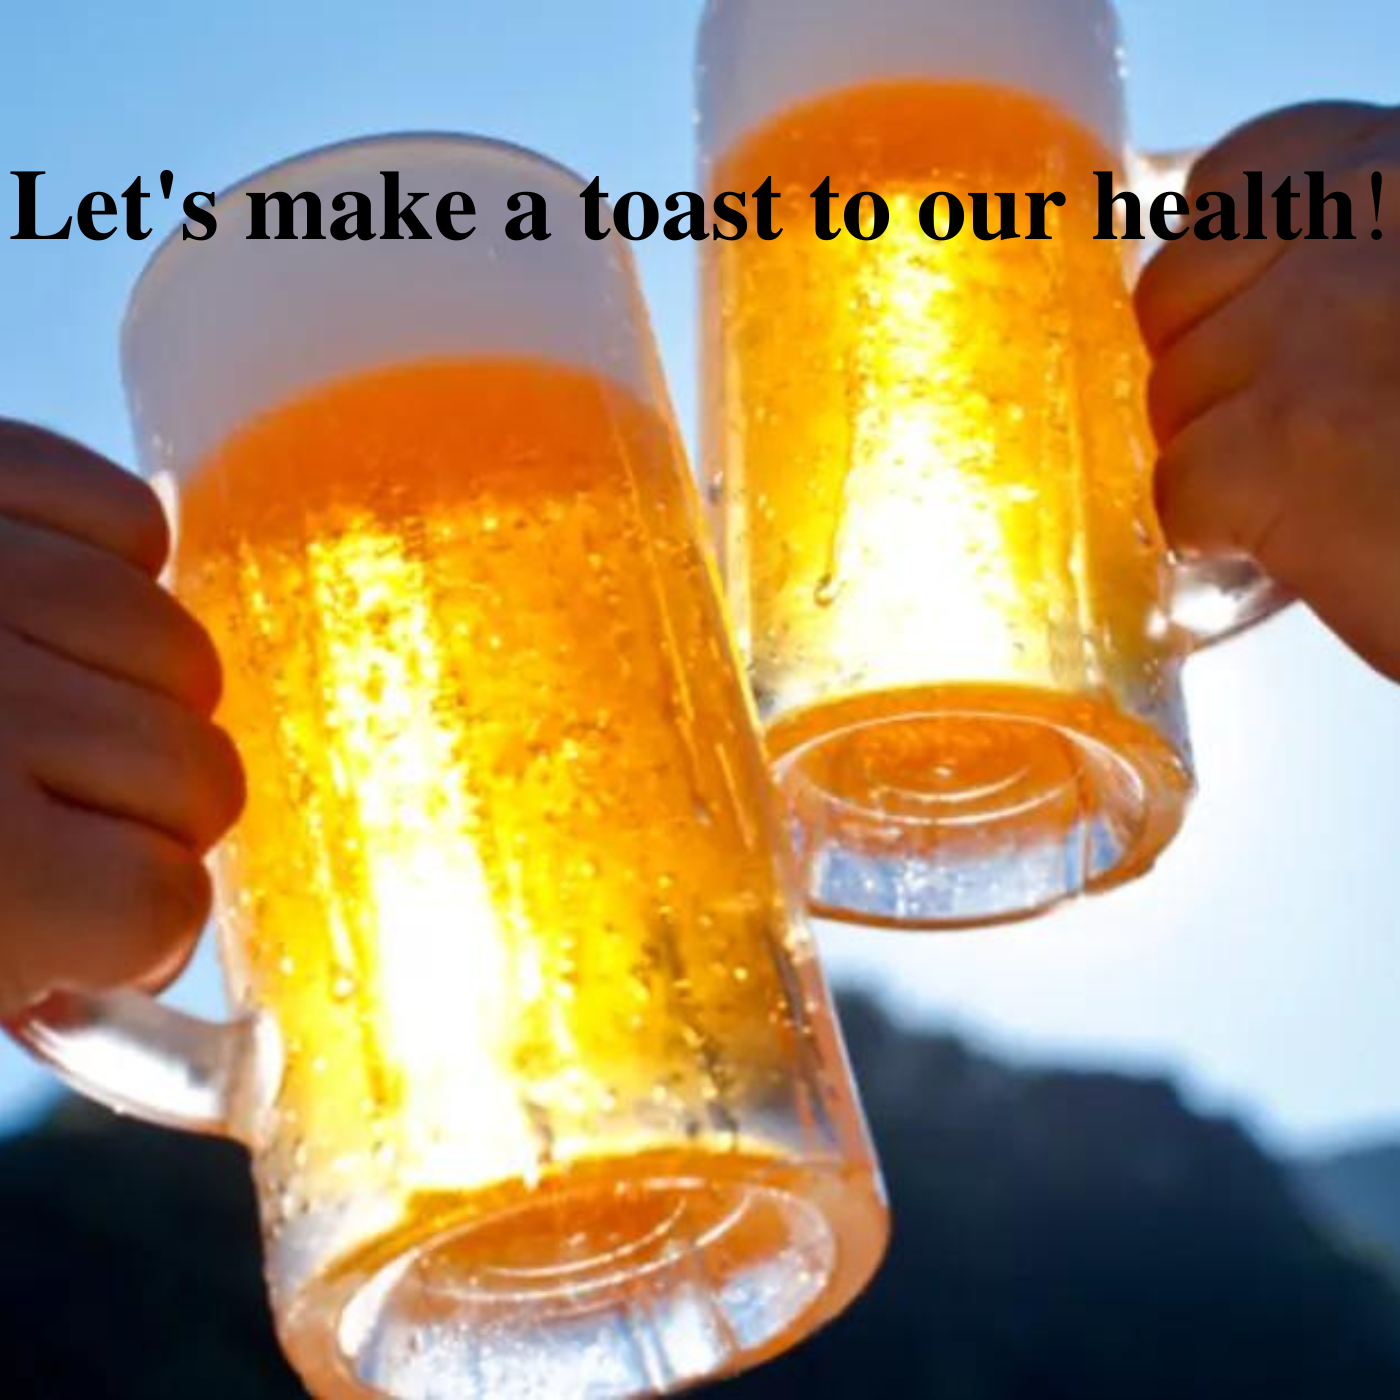 Let's make a toast to our health!